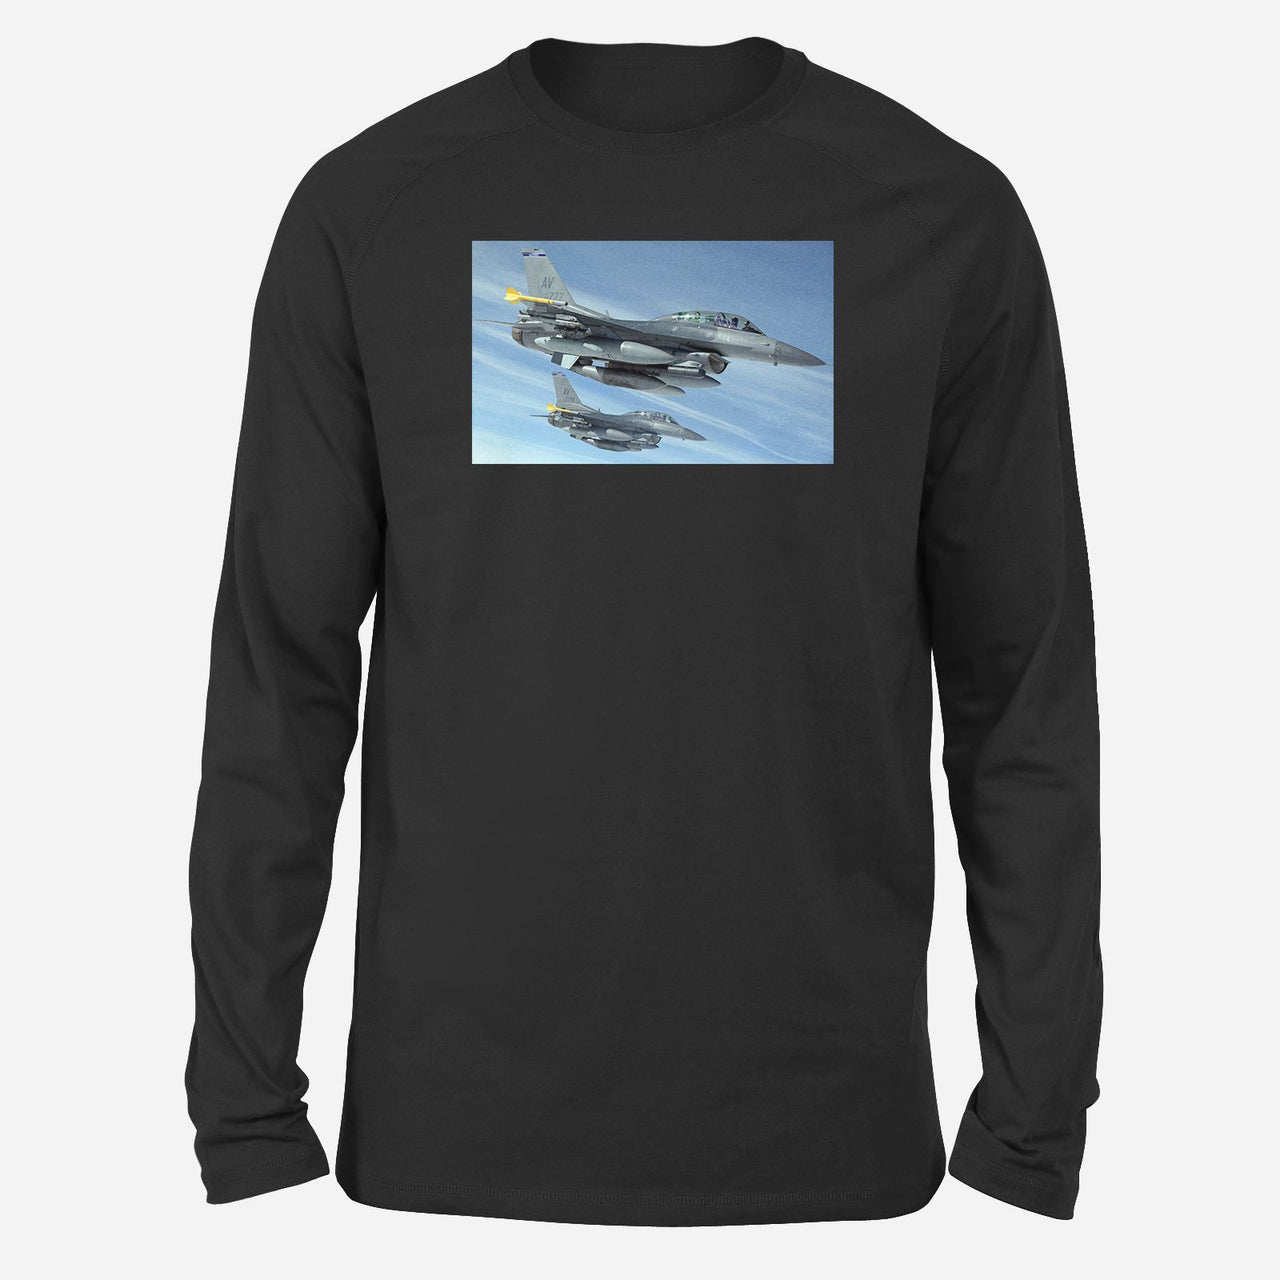 Two Fighting Falcon Designed Long-Sleeve T-Shirts